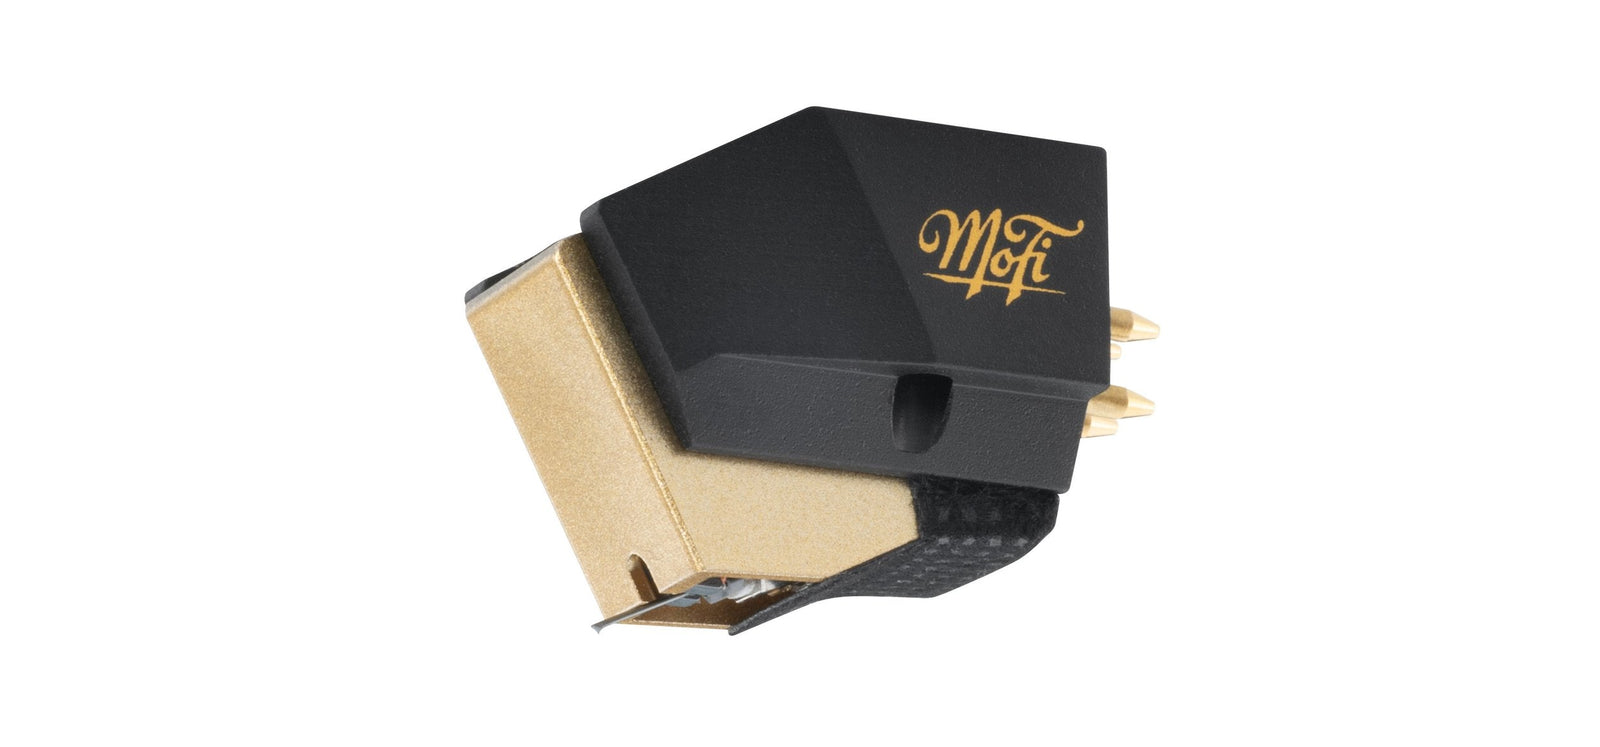 MOBILE FIDELITY ULTRAGOLD MC CARTRIDGE | VINYL SOUND USA Mobile Fidelity Produces Turntables, Phono Stages, Cartridges... Get the best deals at vinylsound.ca for Mobile Fidelity StudioDeck Foundation Turntable - Ultradeck - Fender PrecisionDeck - Mobile Fidelity UltraPhono Phono Stage - Mastertracker - MasterTracker Cartridge - UltraGold MC - StudioTracker Cartridge...